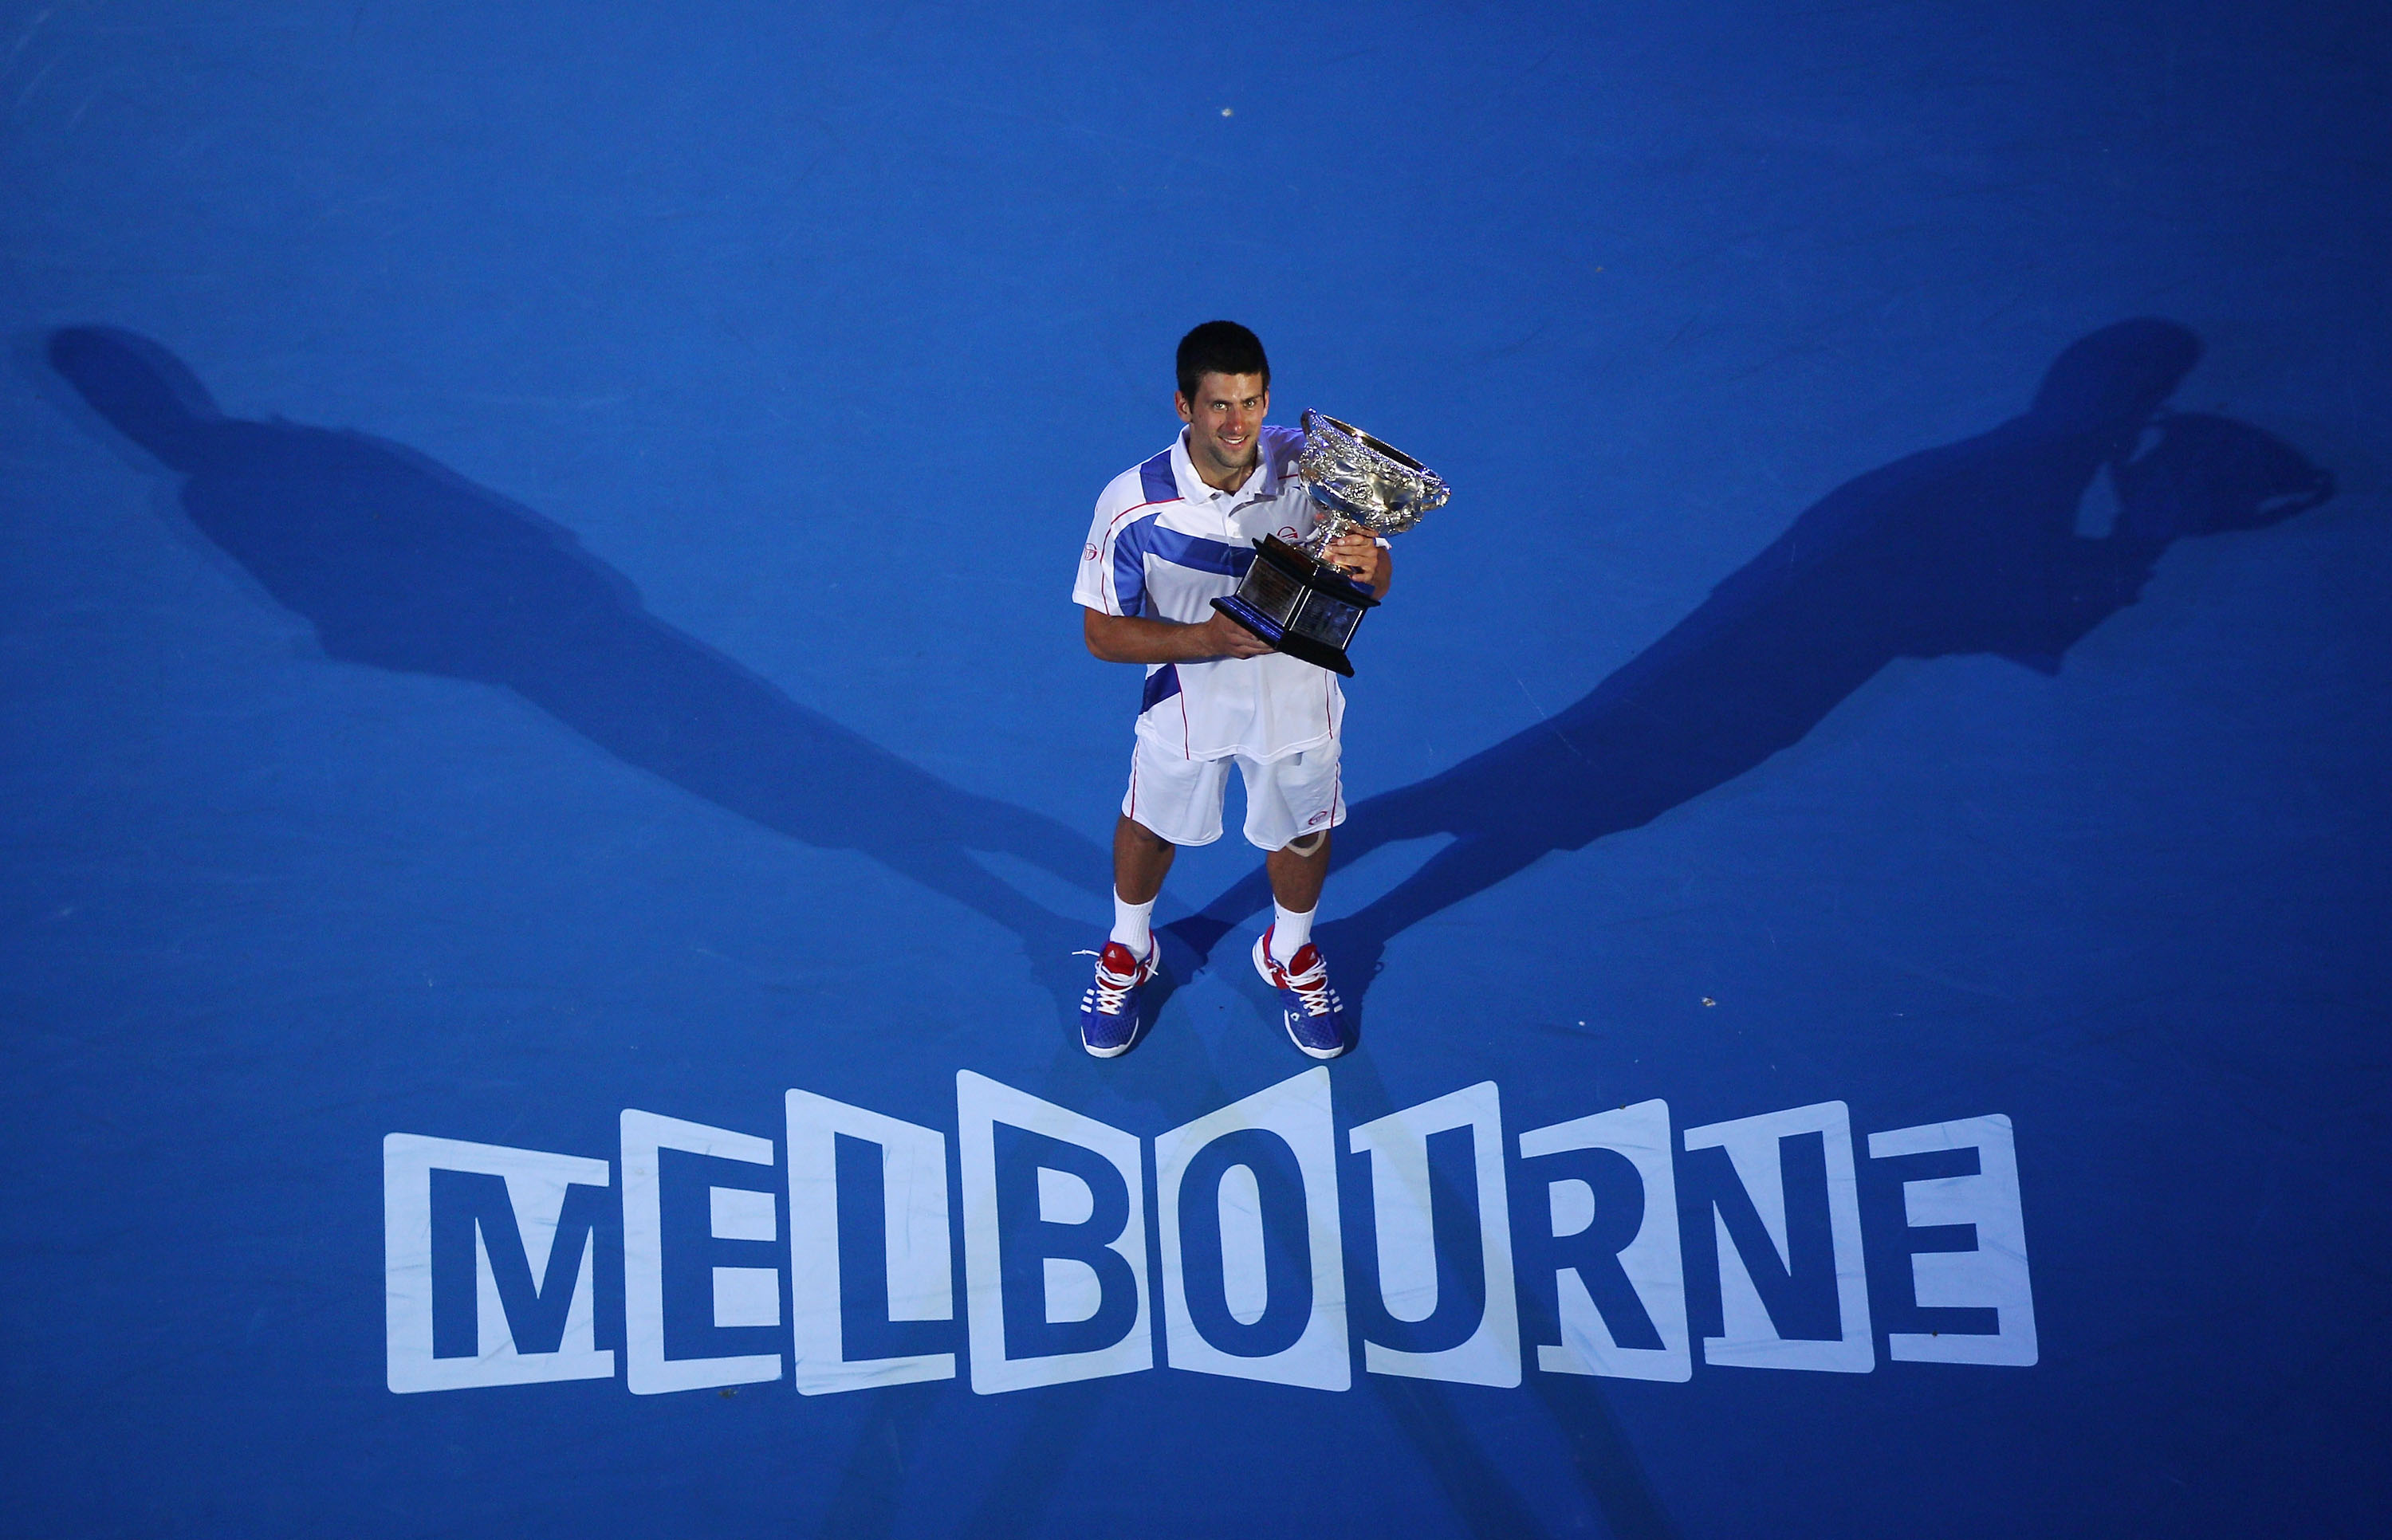 MELBOURNE, AUSTRALIA - JANUARY 30:  Novak Djokovic of Serbia holds the Norman Brookes Challenge Cup after winning his men's final match against Andy Murray of Great Britain during day fourteen of the 2011 Australian Open at Melbourne Park on January 30, 2